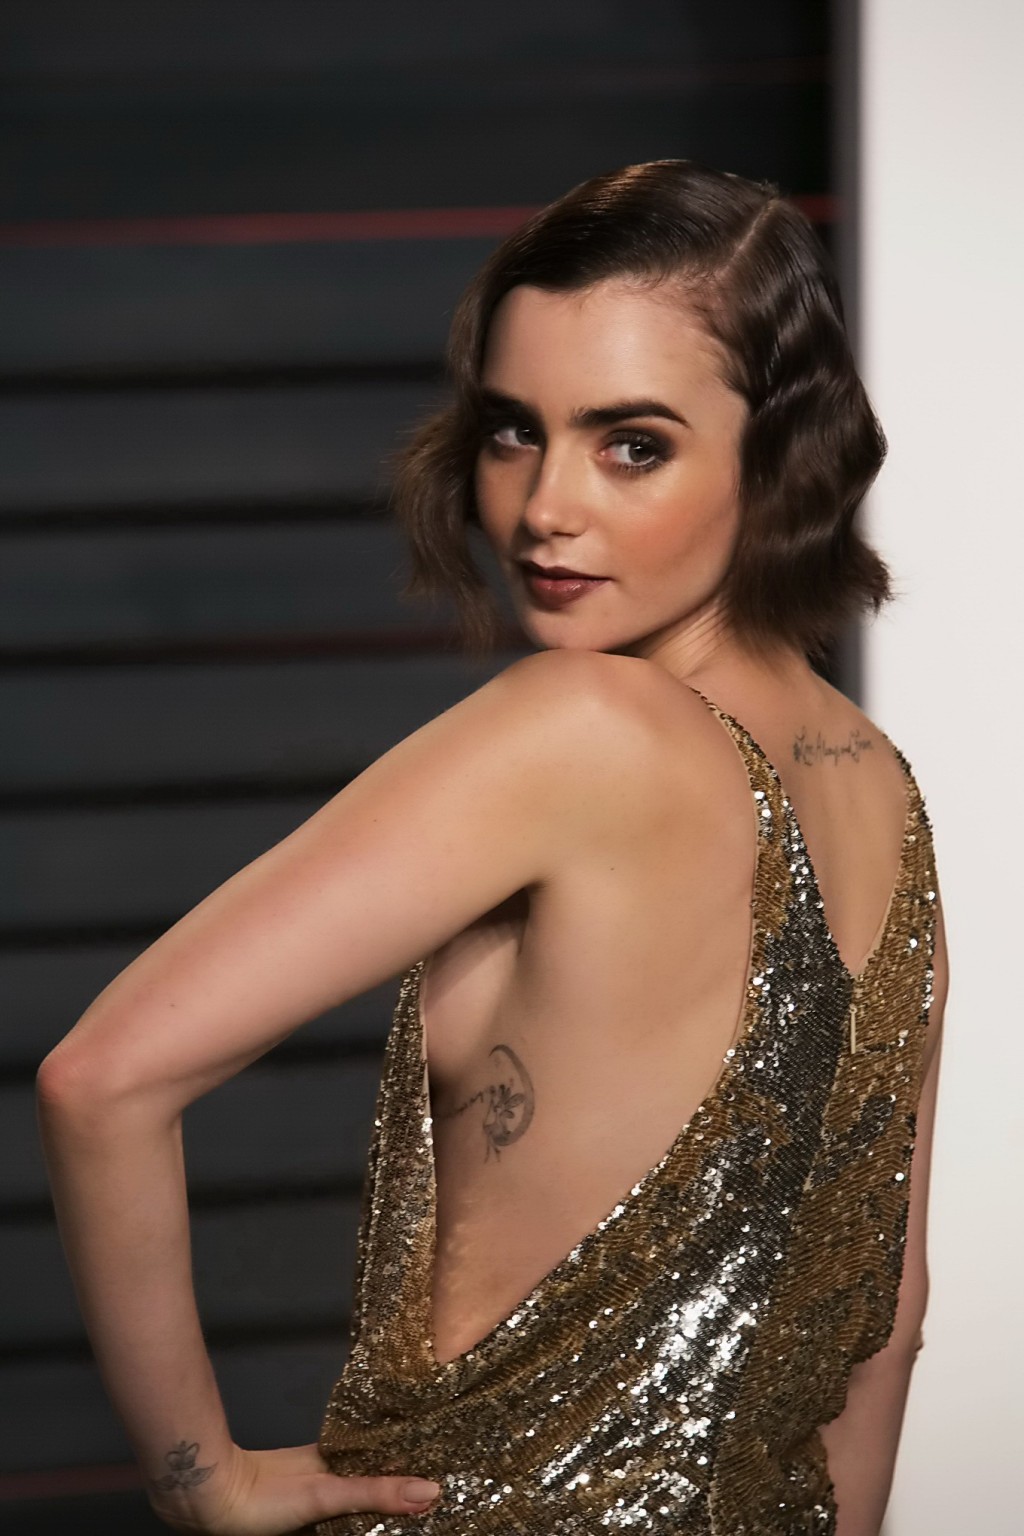 Lily Collins showing sideboob huge cleavage and legs #75145315